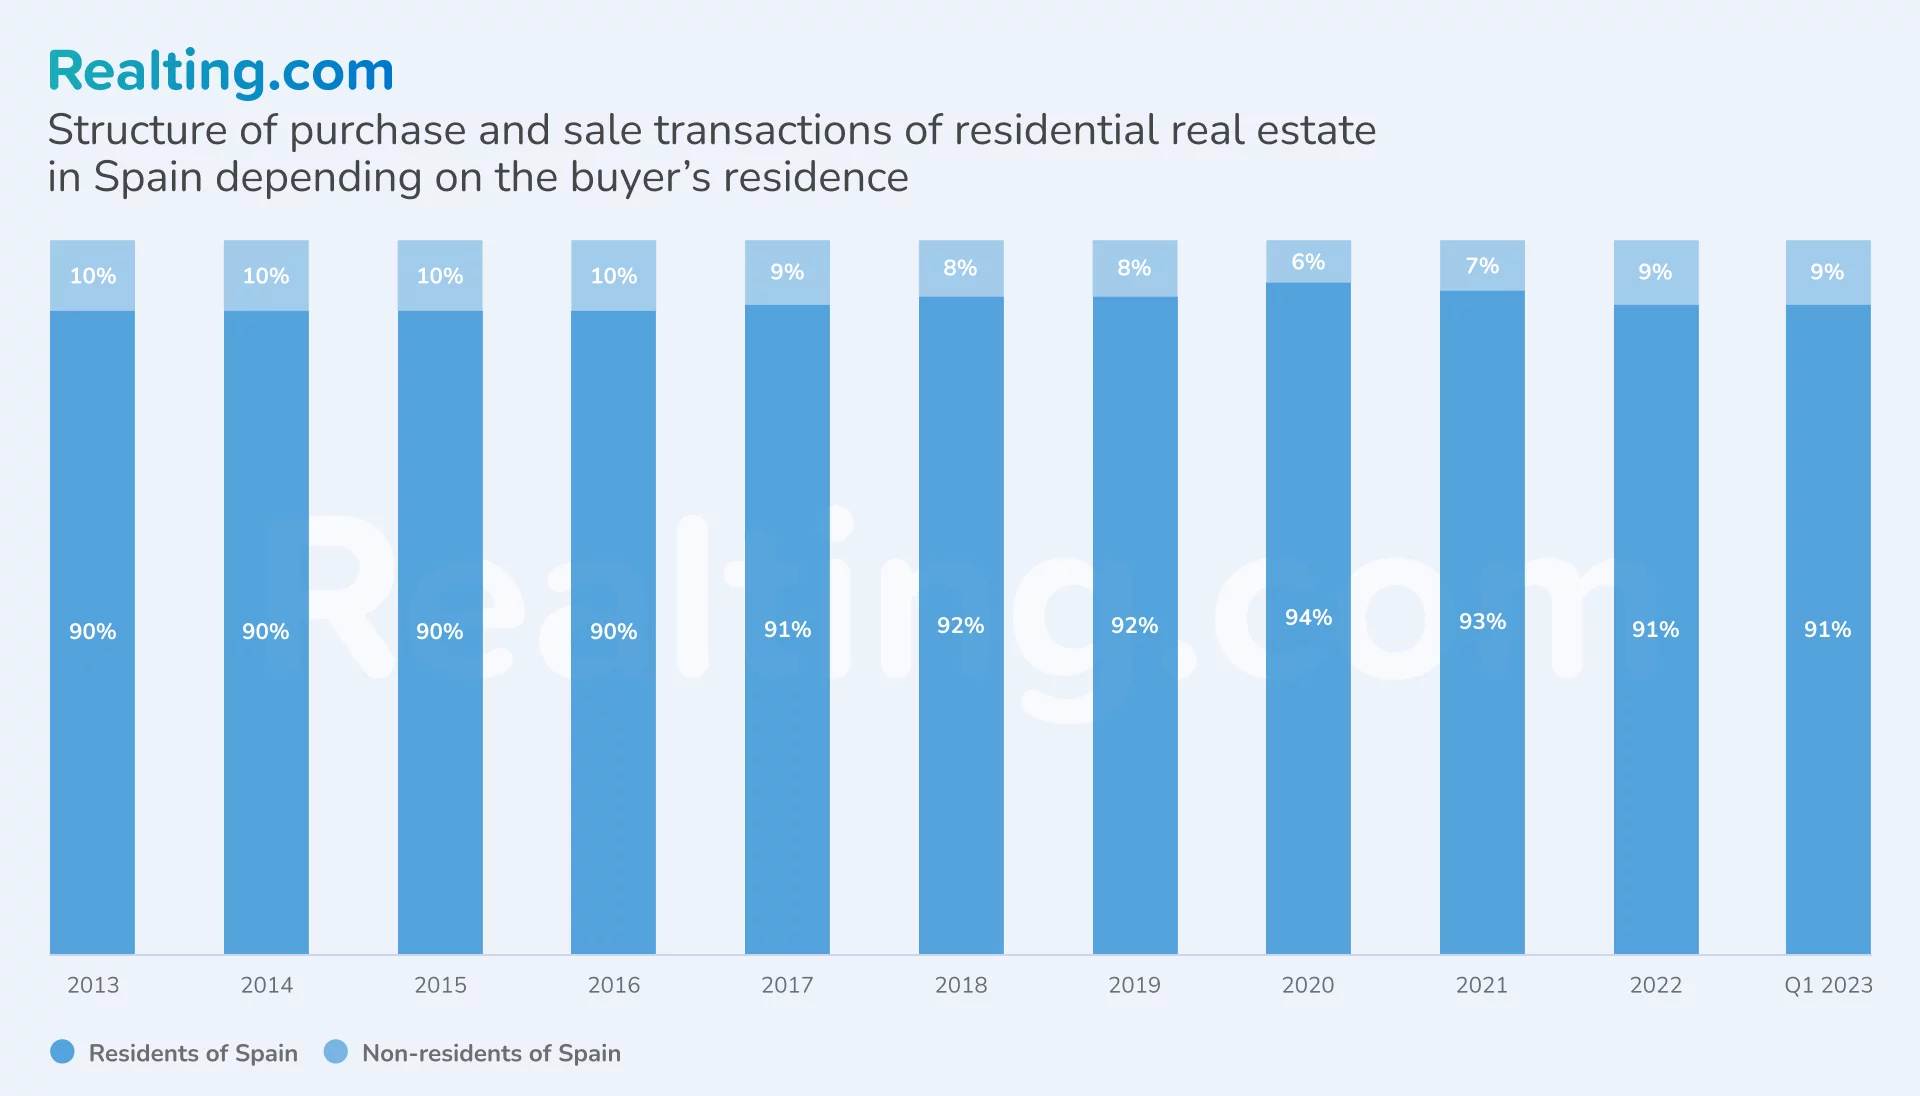 Structure of purchase and sale transactions of residential real estate in Spain depending on the buyer’s residence